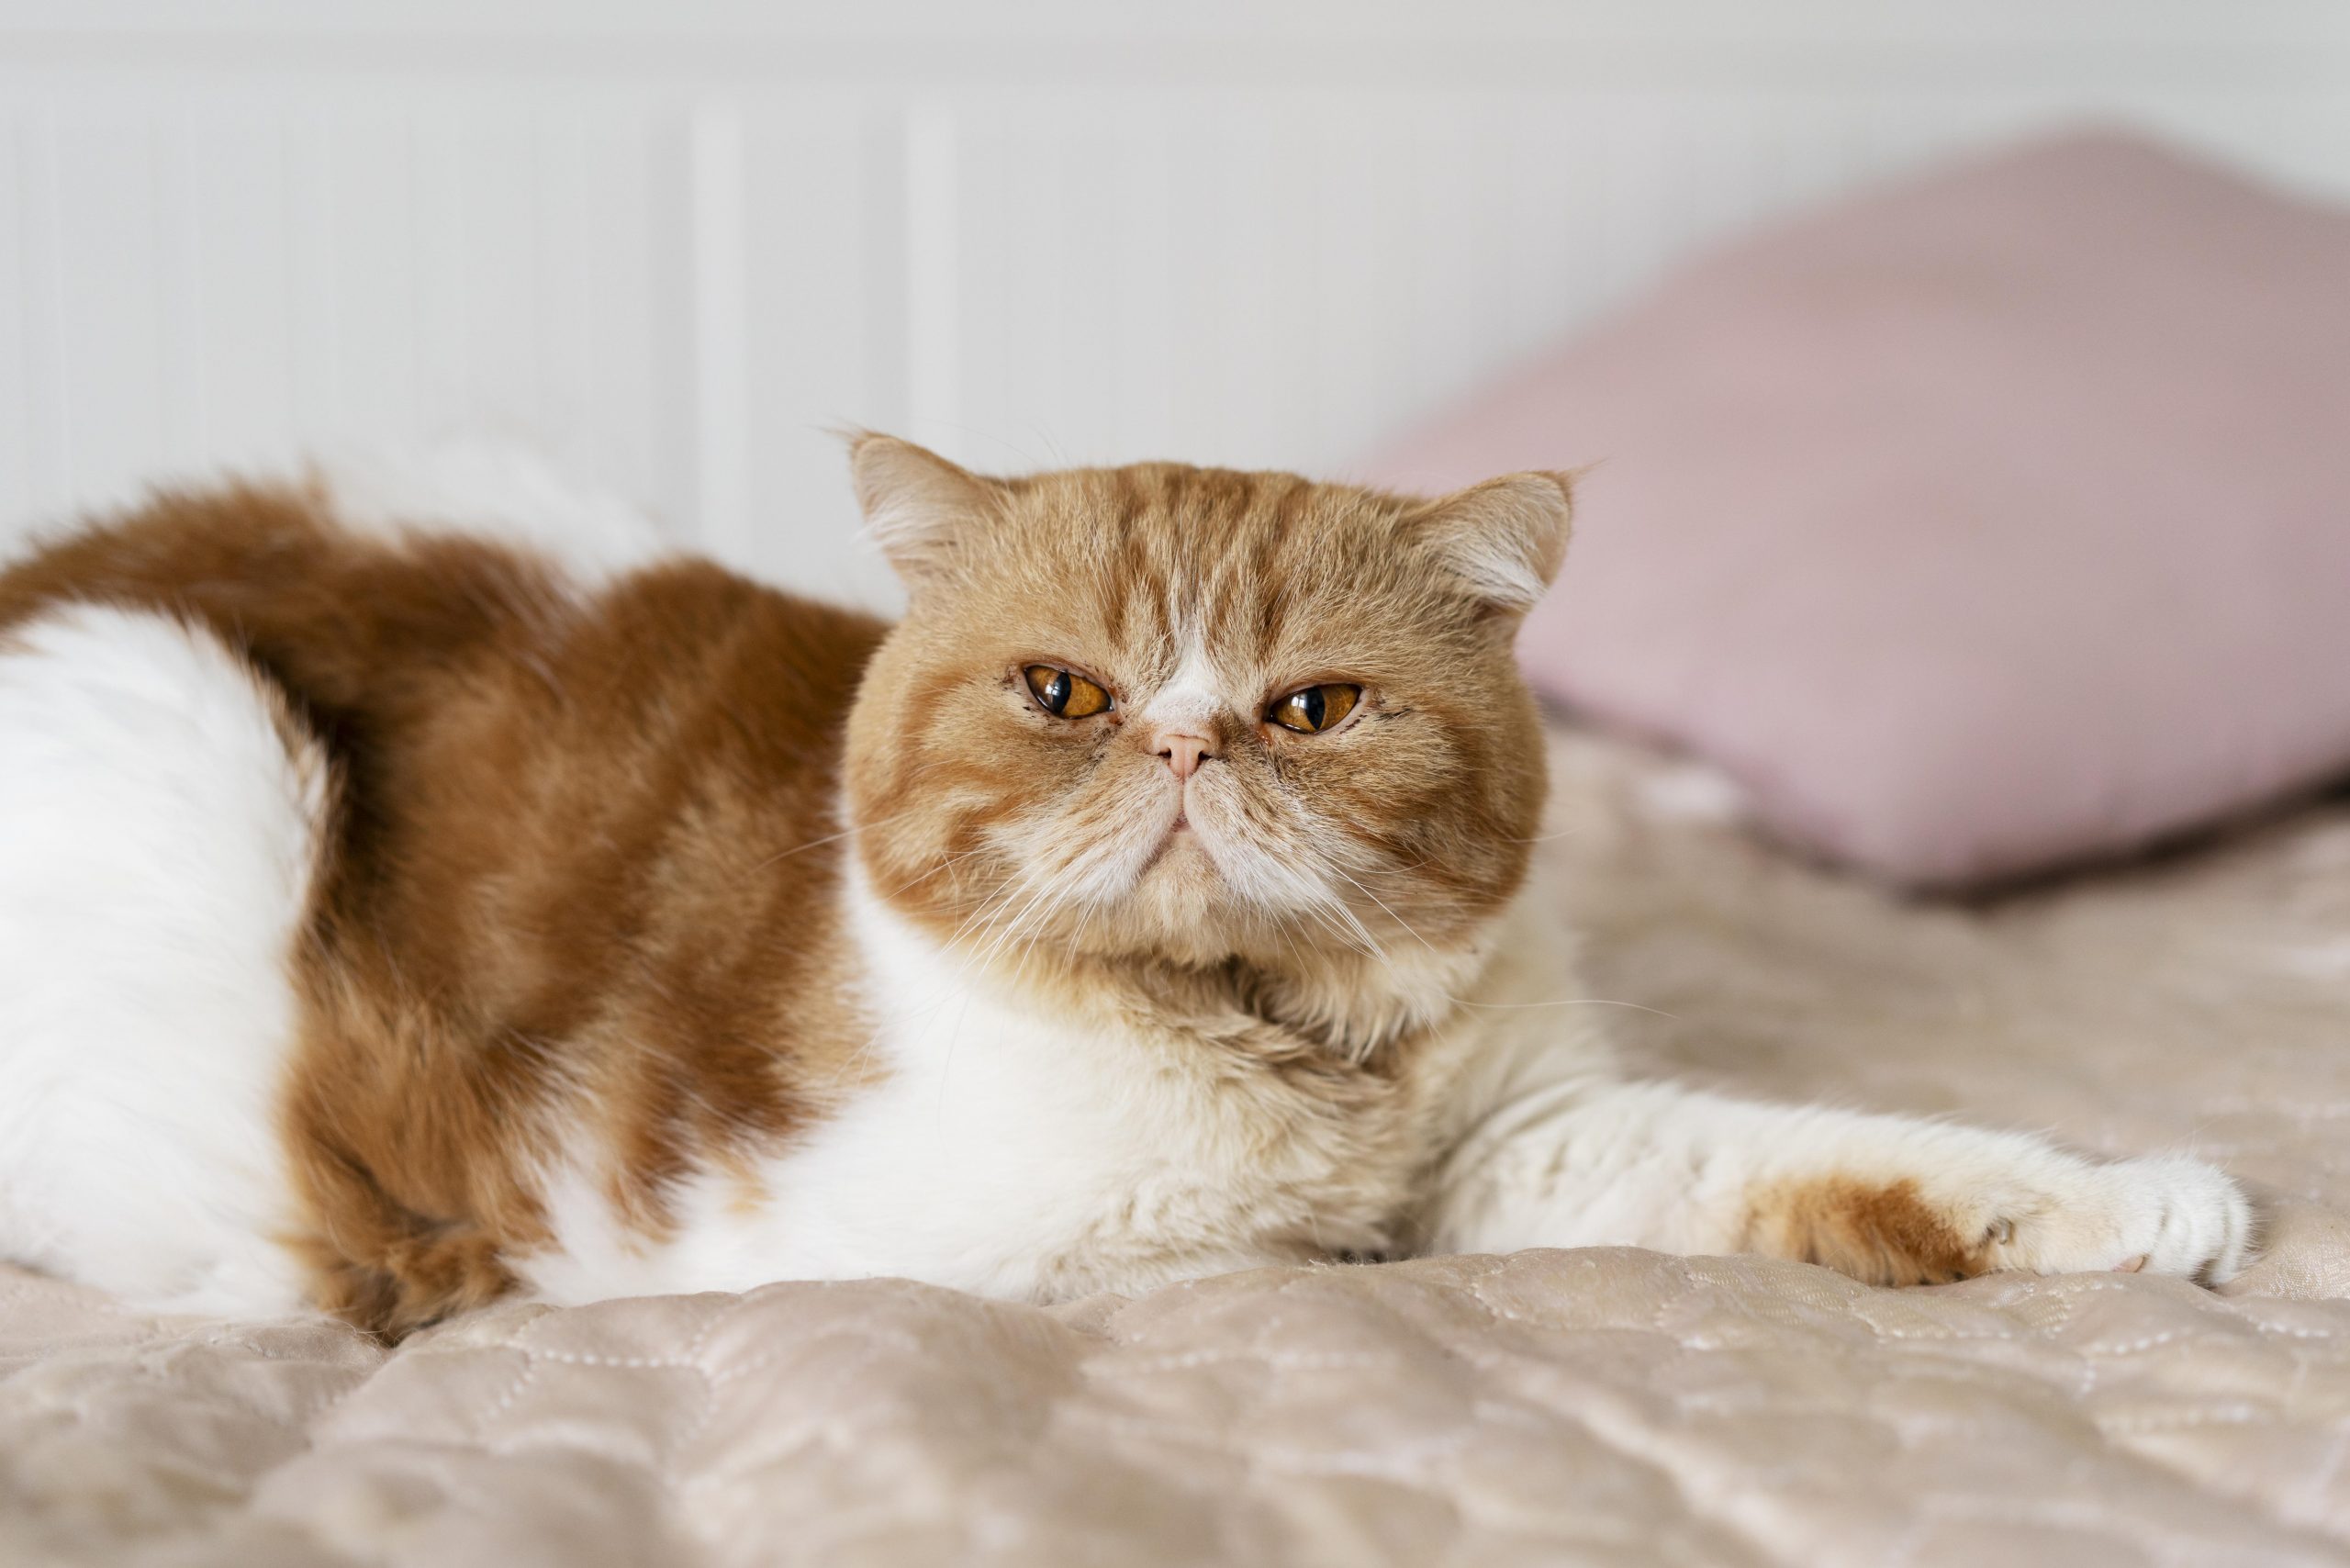 Cat flu is feline respiratory disease caused by a combination of viruses and bacteria